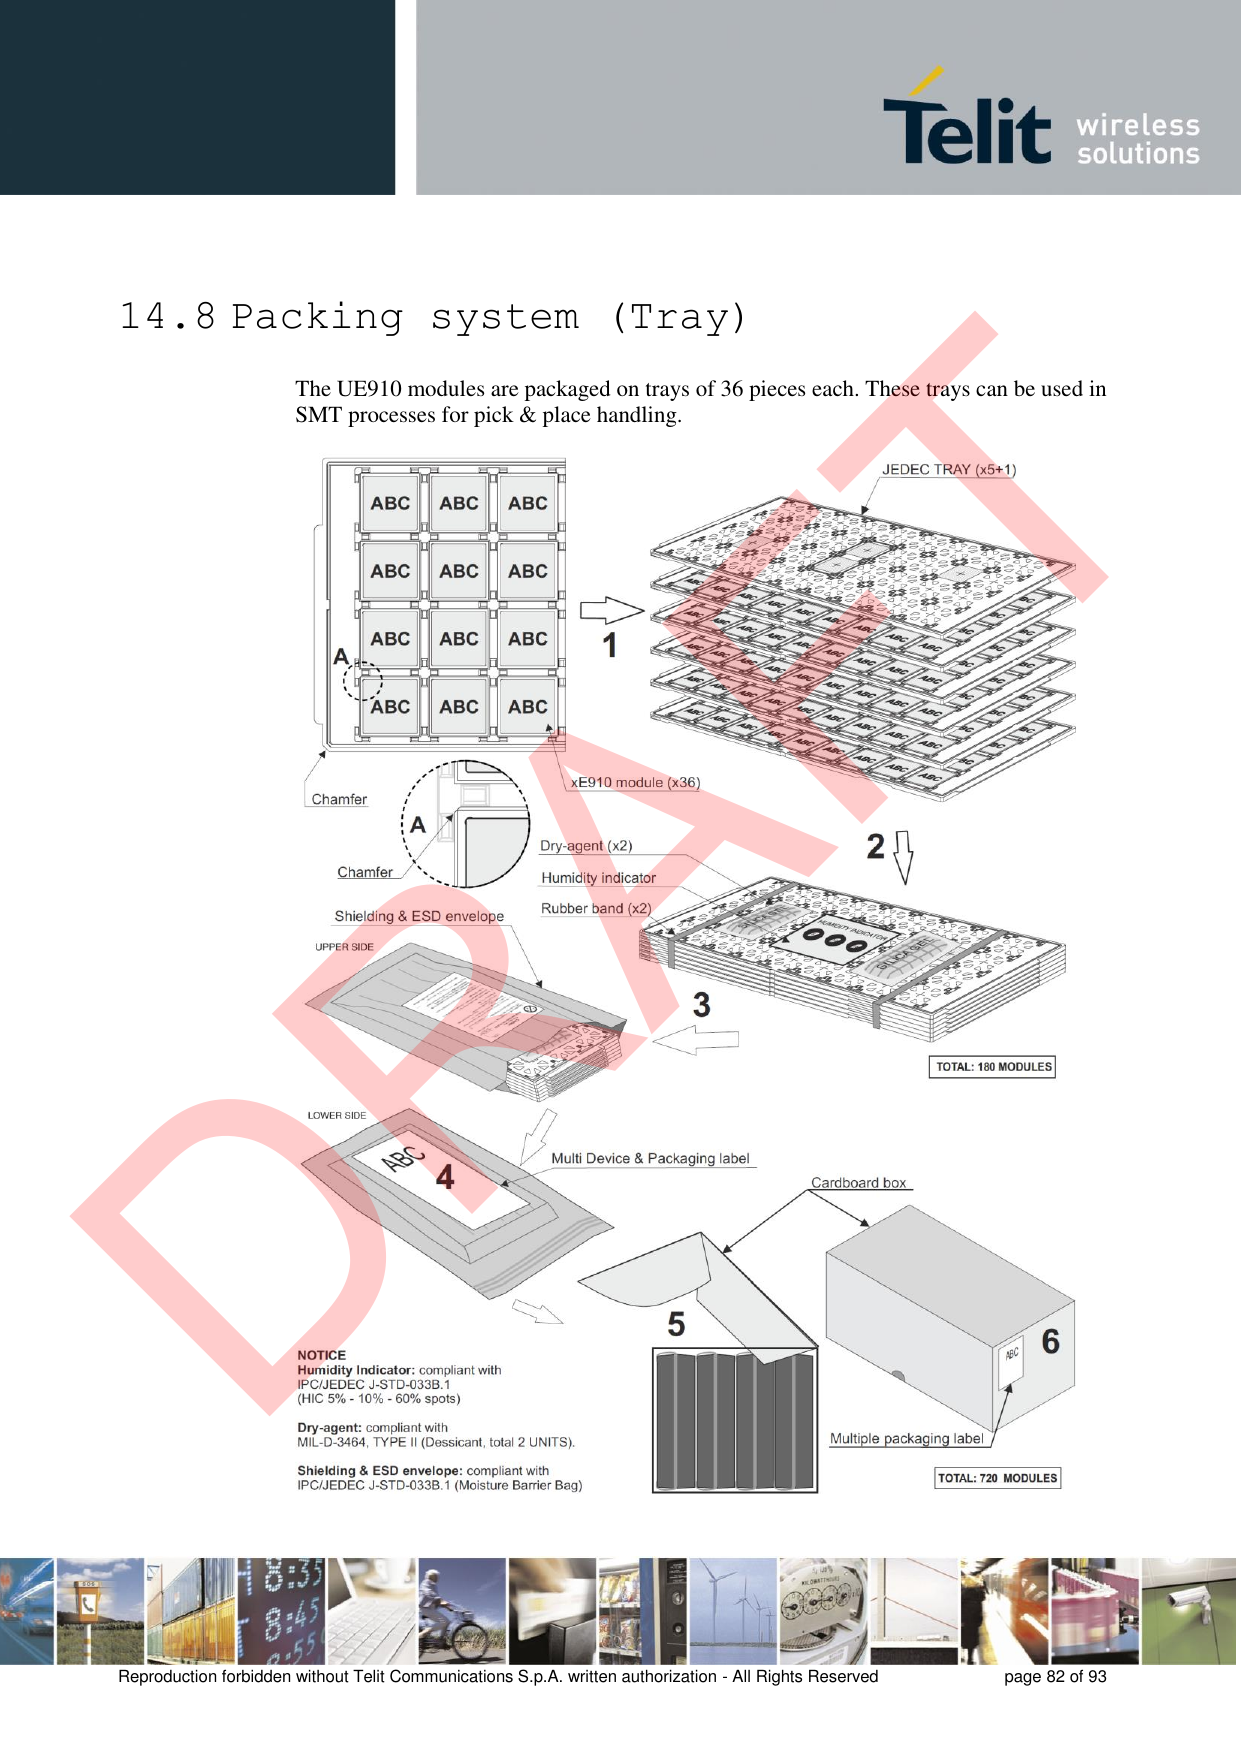 Reproduction forbidden without Telit Communications S.p.A. written authorization - All Rights Reserved  page 82 of 93 14.8 Packing system (Tray) The UE910 modules are packaged on trays of 36 pieces each. These trays can be used in SMT processes for pick &amp; place handling. DRAFT